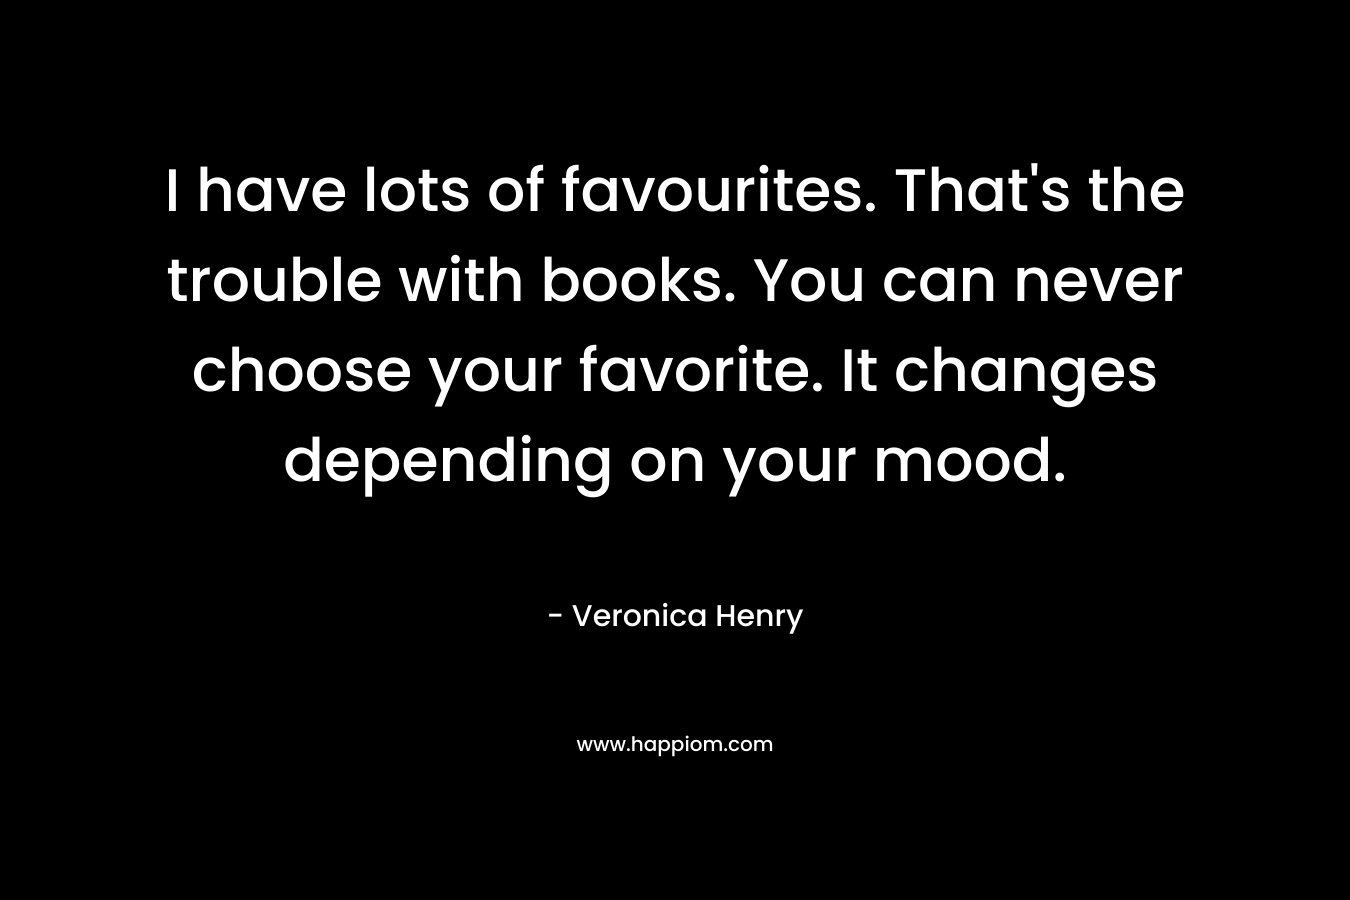 I have lots of favourites. That's the trouble with books. You can never choose your favorite. It changes depending on your mood.